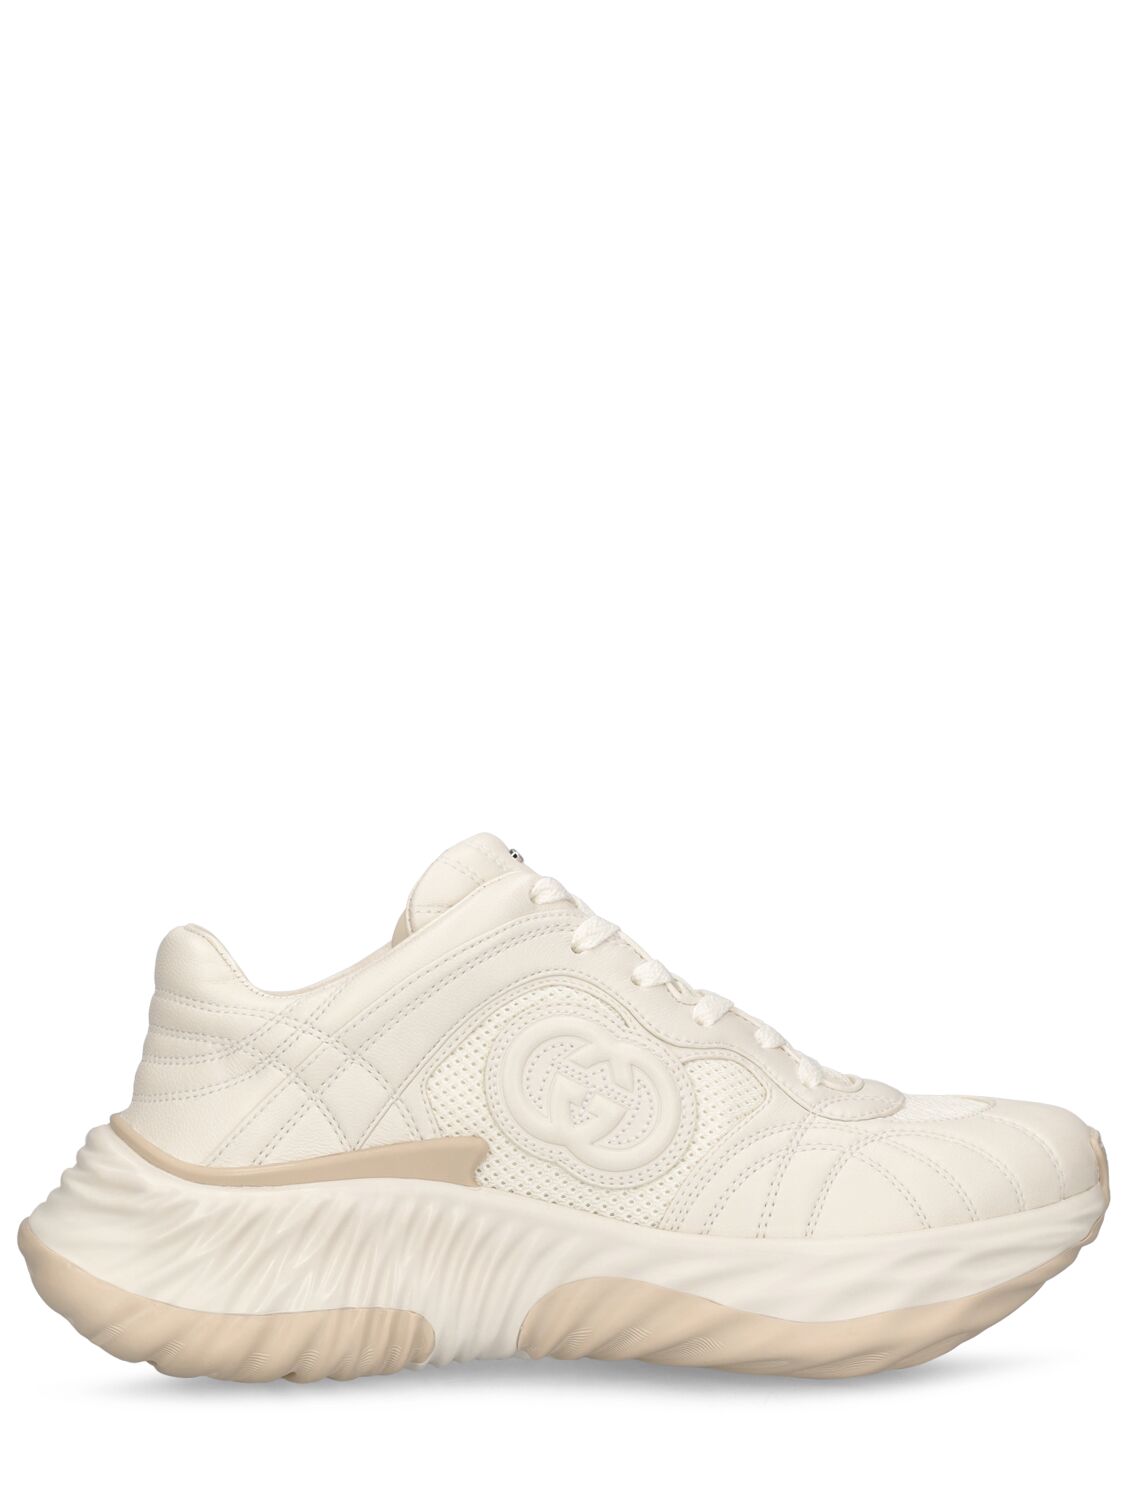 Gucci 65mm Ripple Leather Trainers In Off White